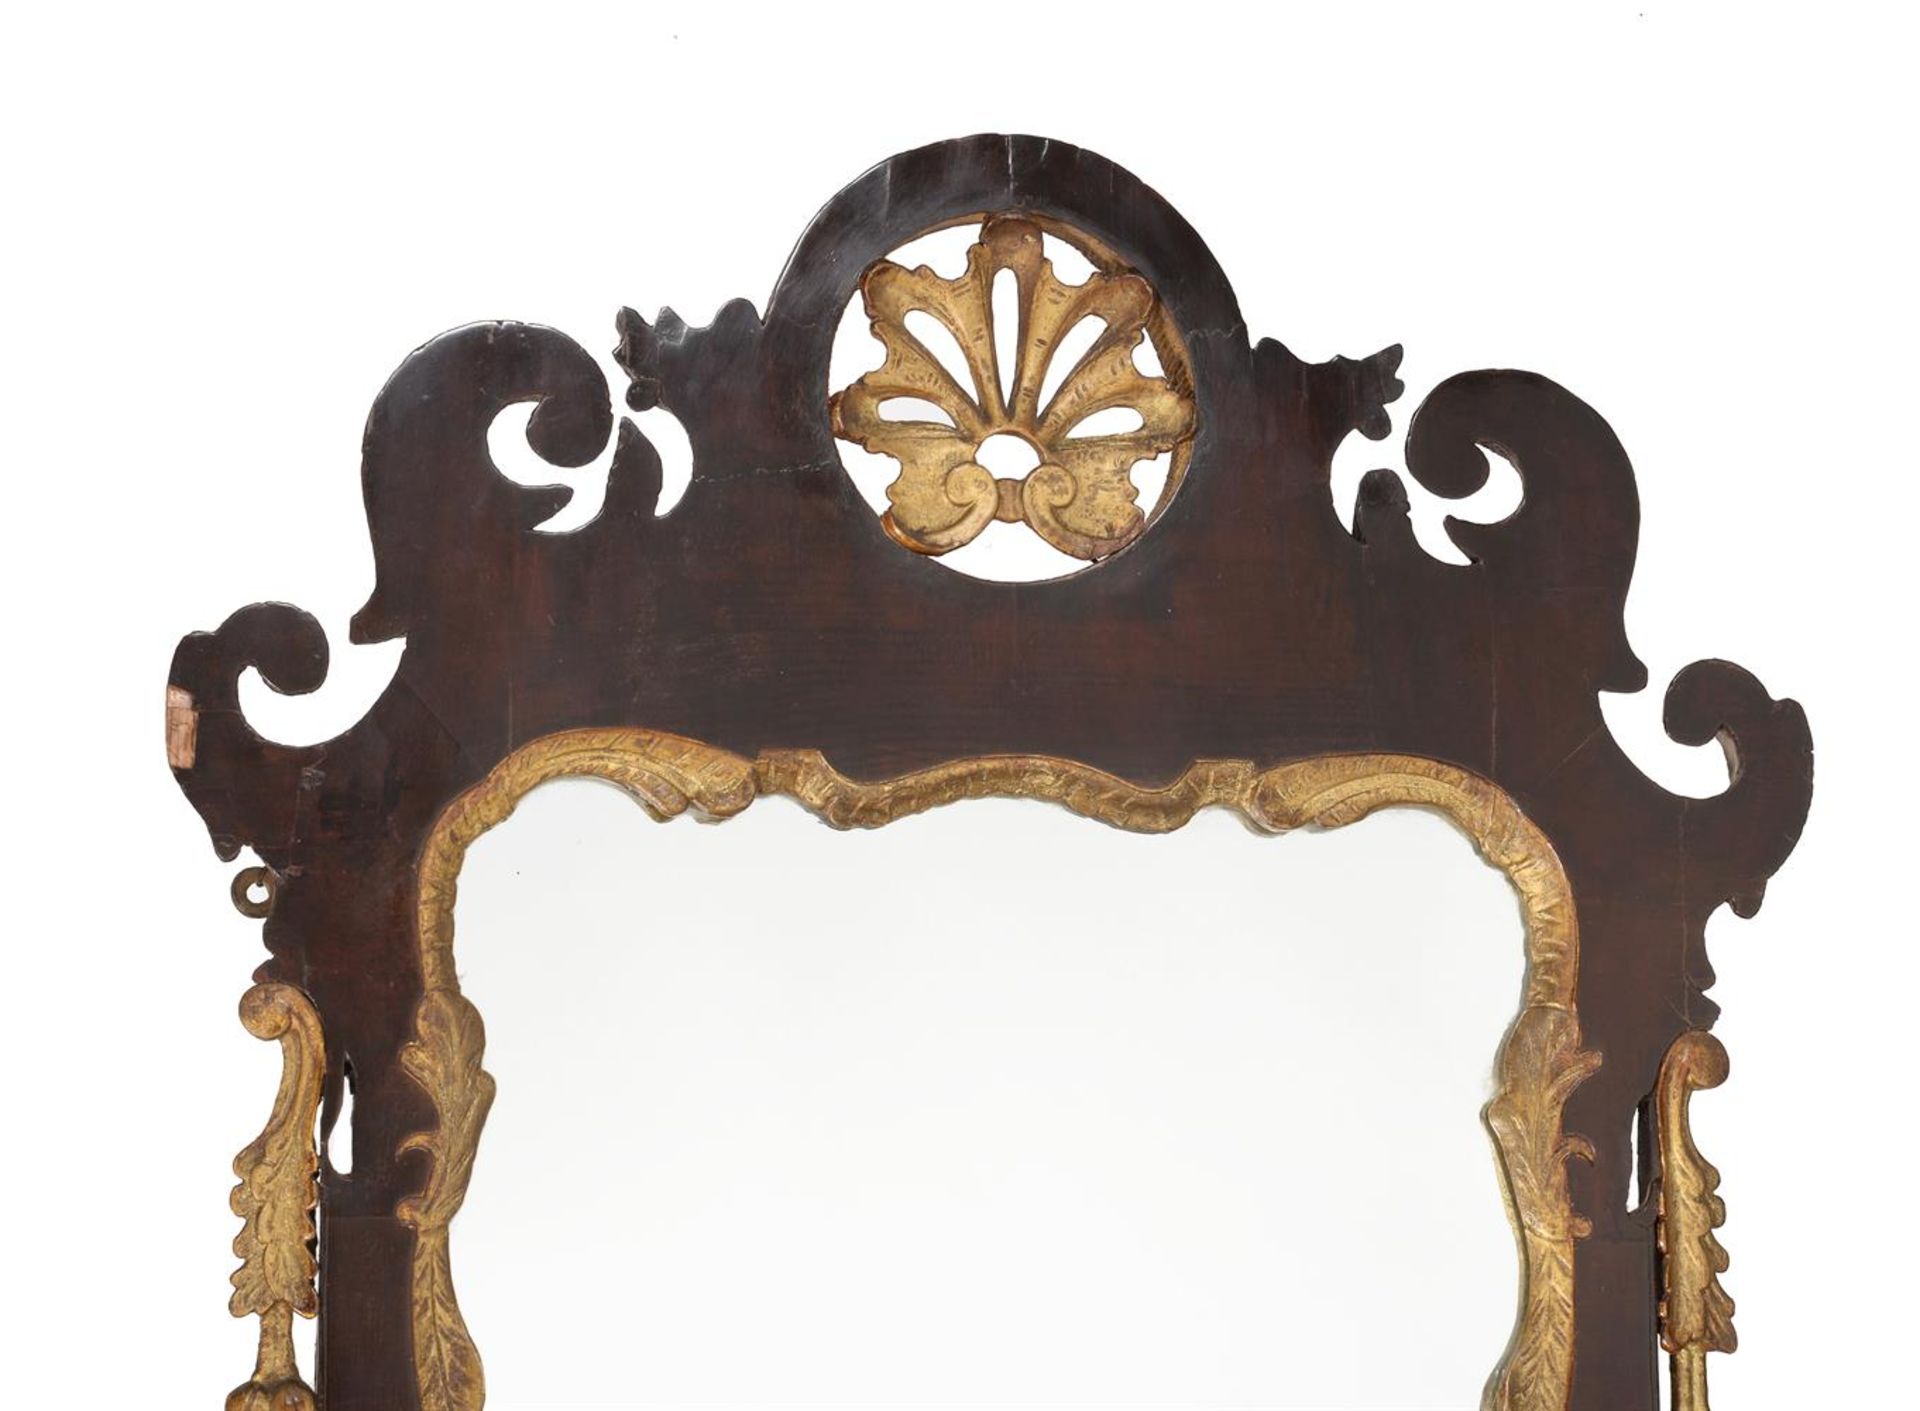 A GEORGE III MAHOGANY AND PARCEL GILT MIRROR, CIRCA 1780 - Image 2 of 3